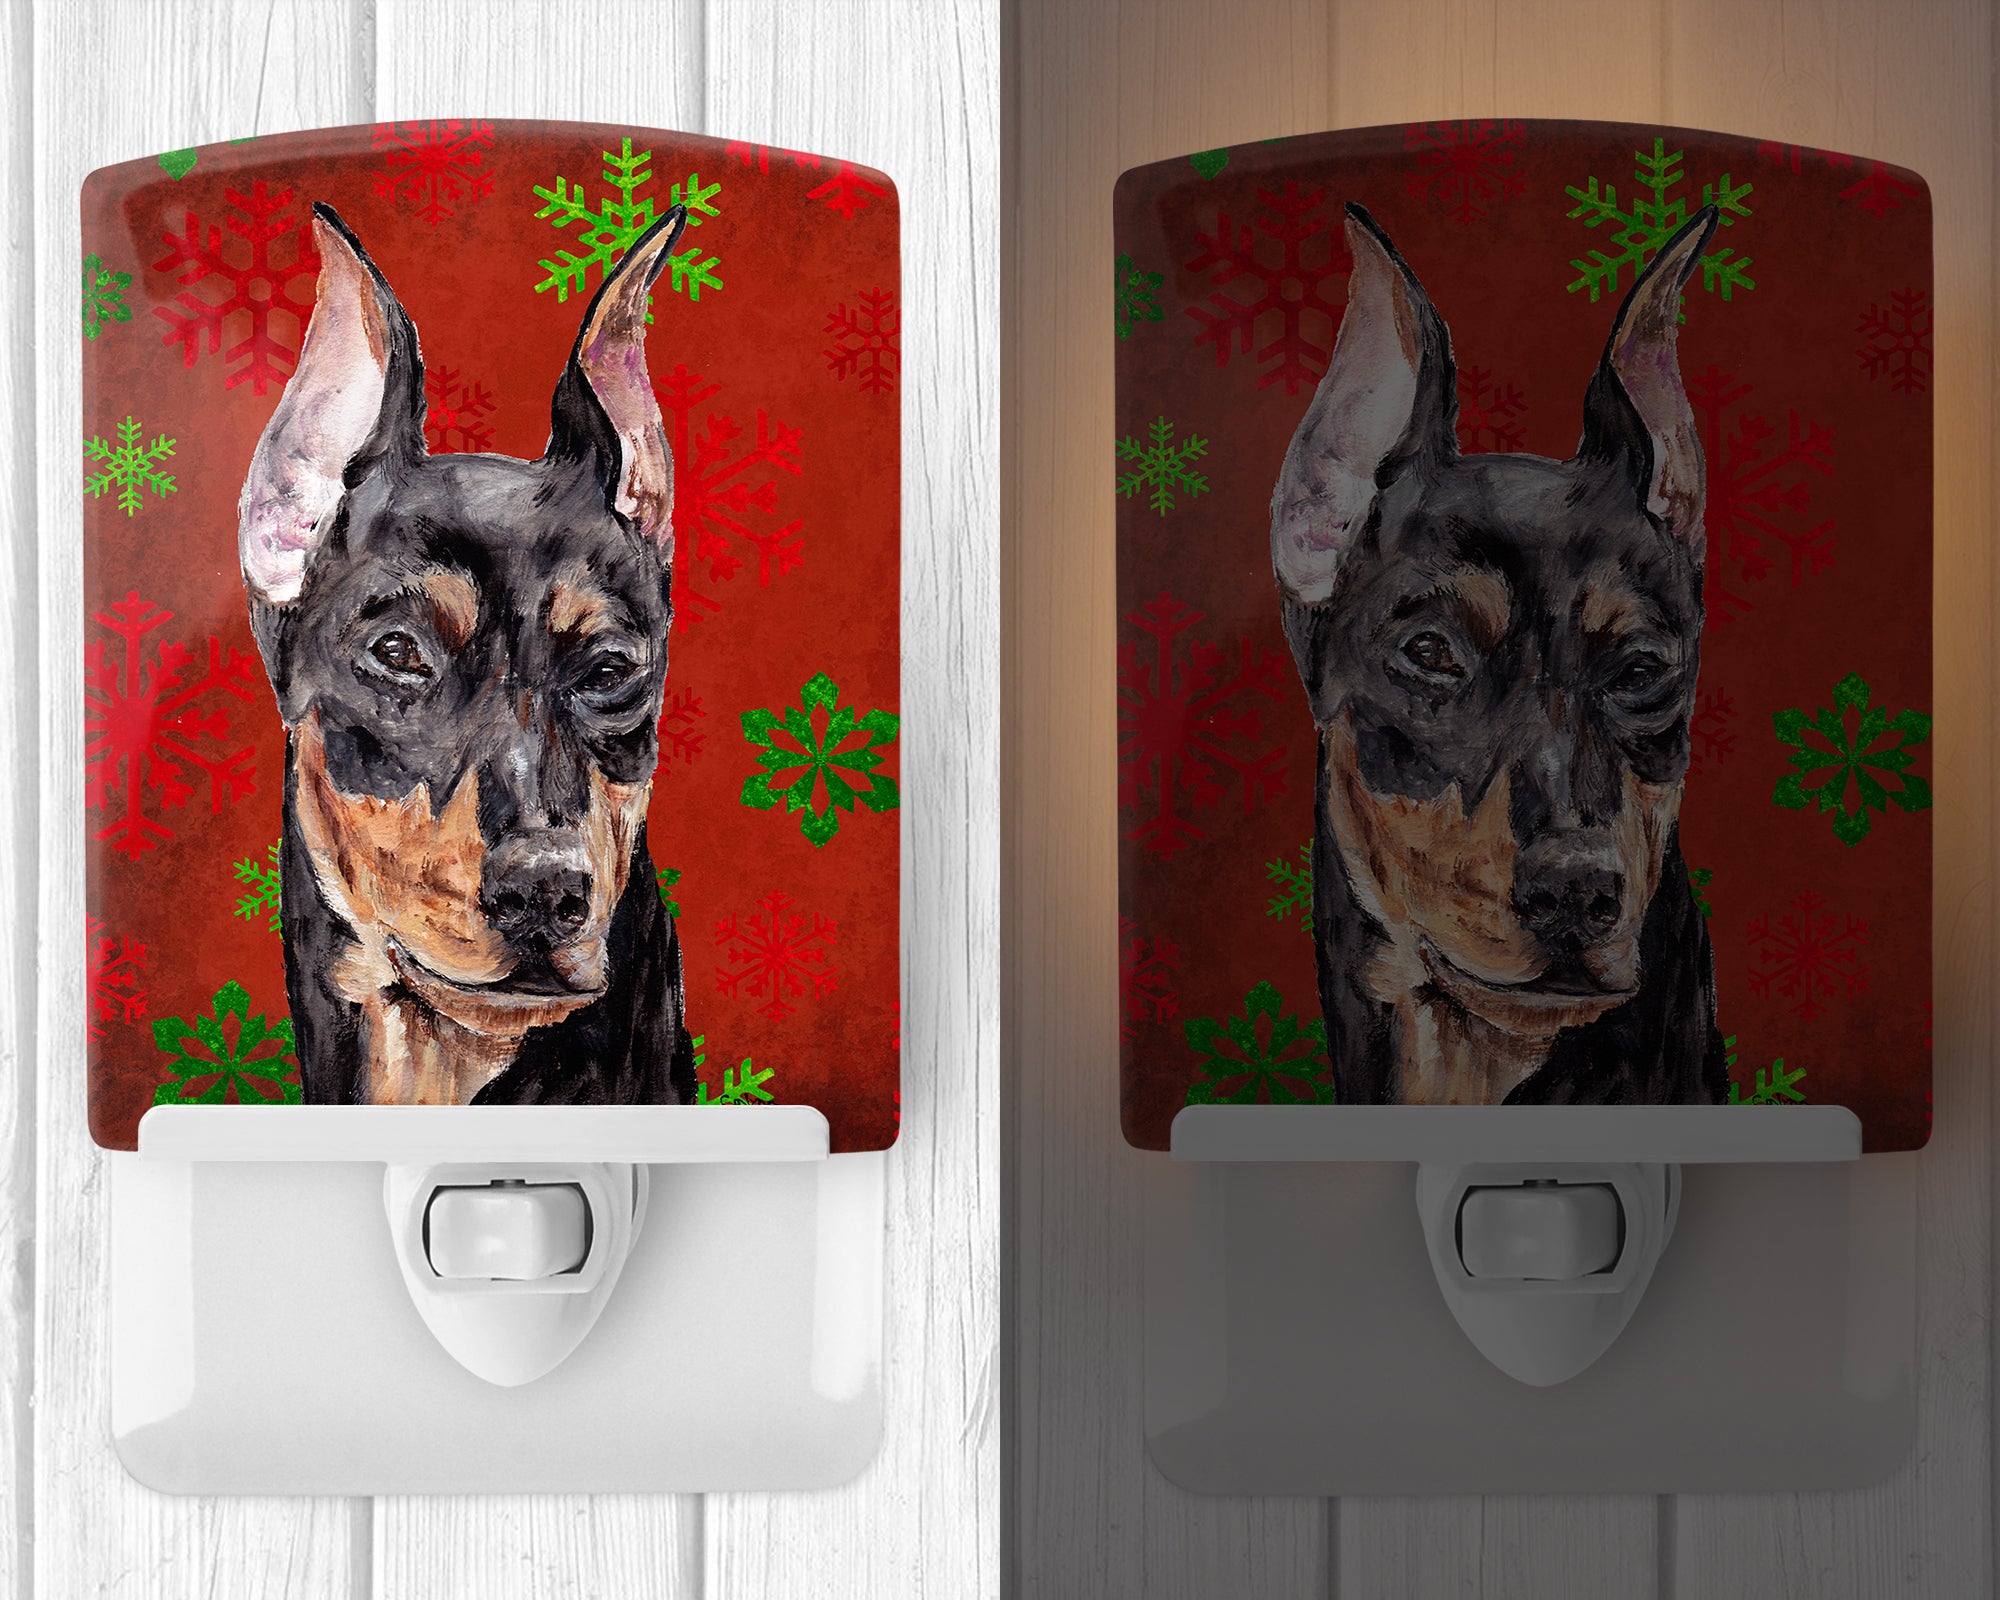 German Pinscher Red Snowflakes Holiday Ceramic Night Light SC9764CNL - the-store.com